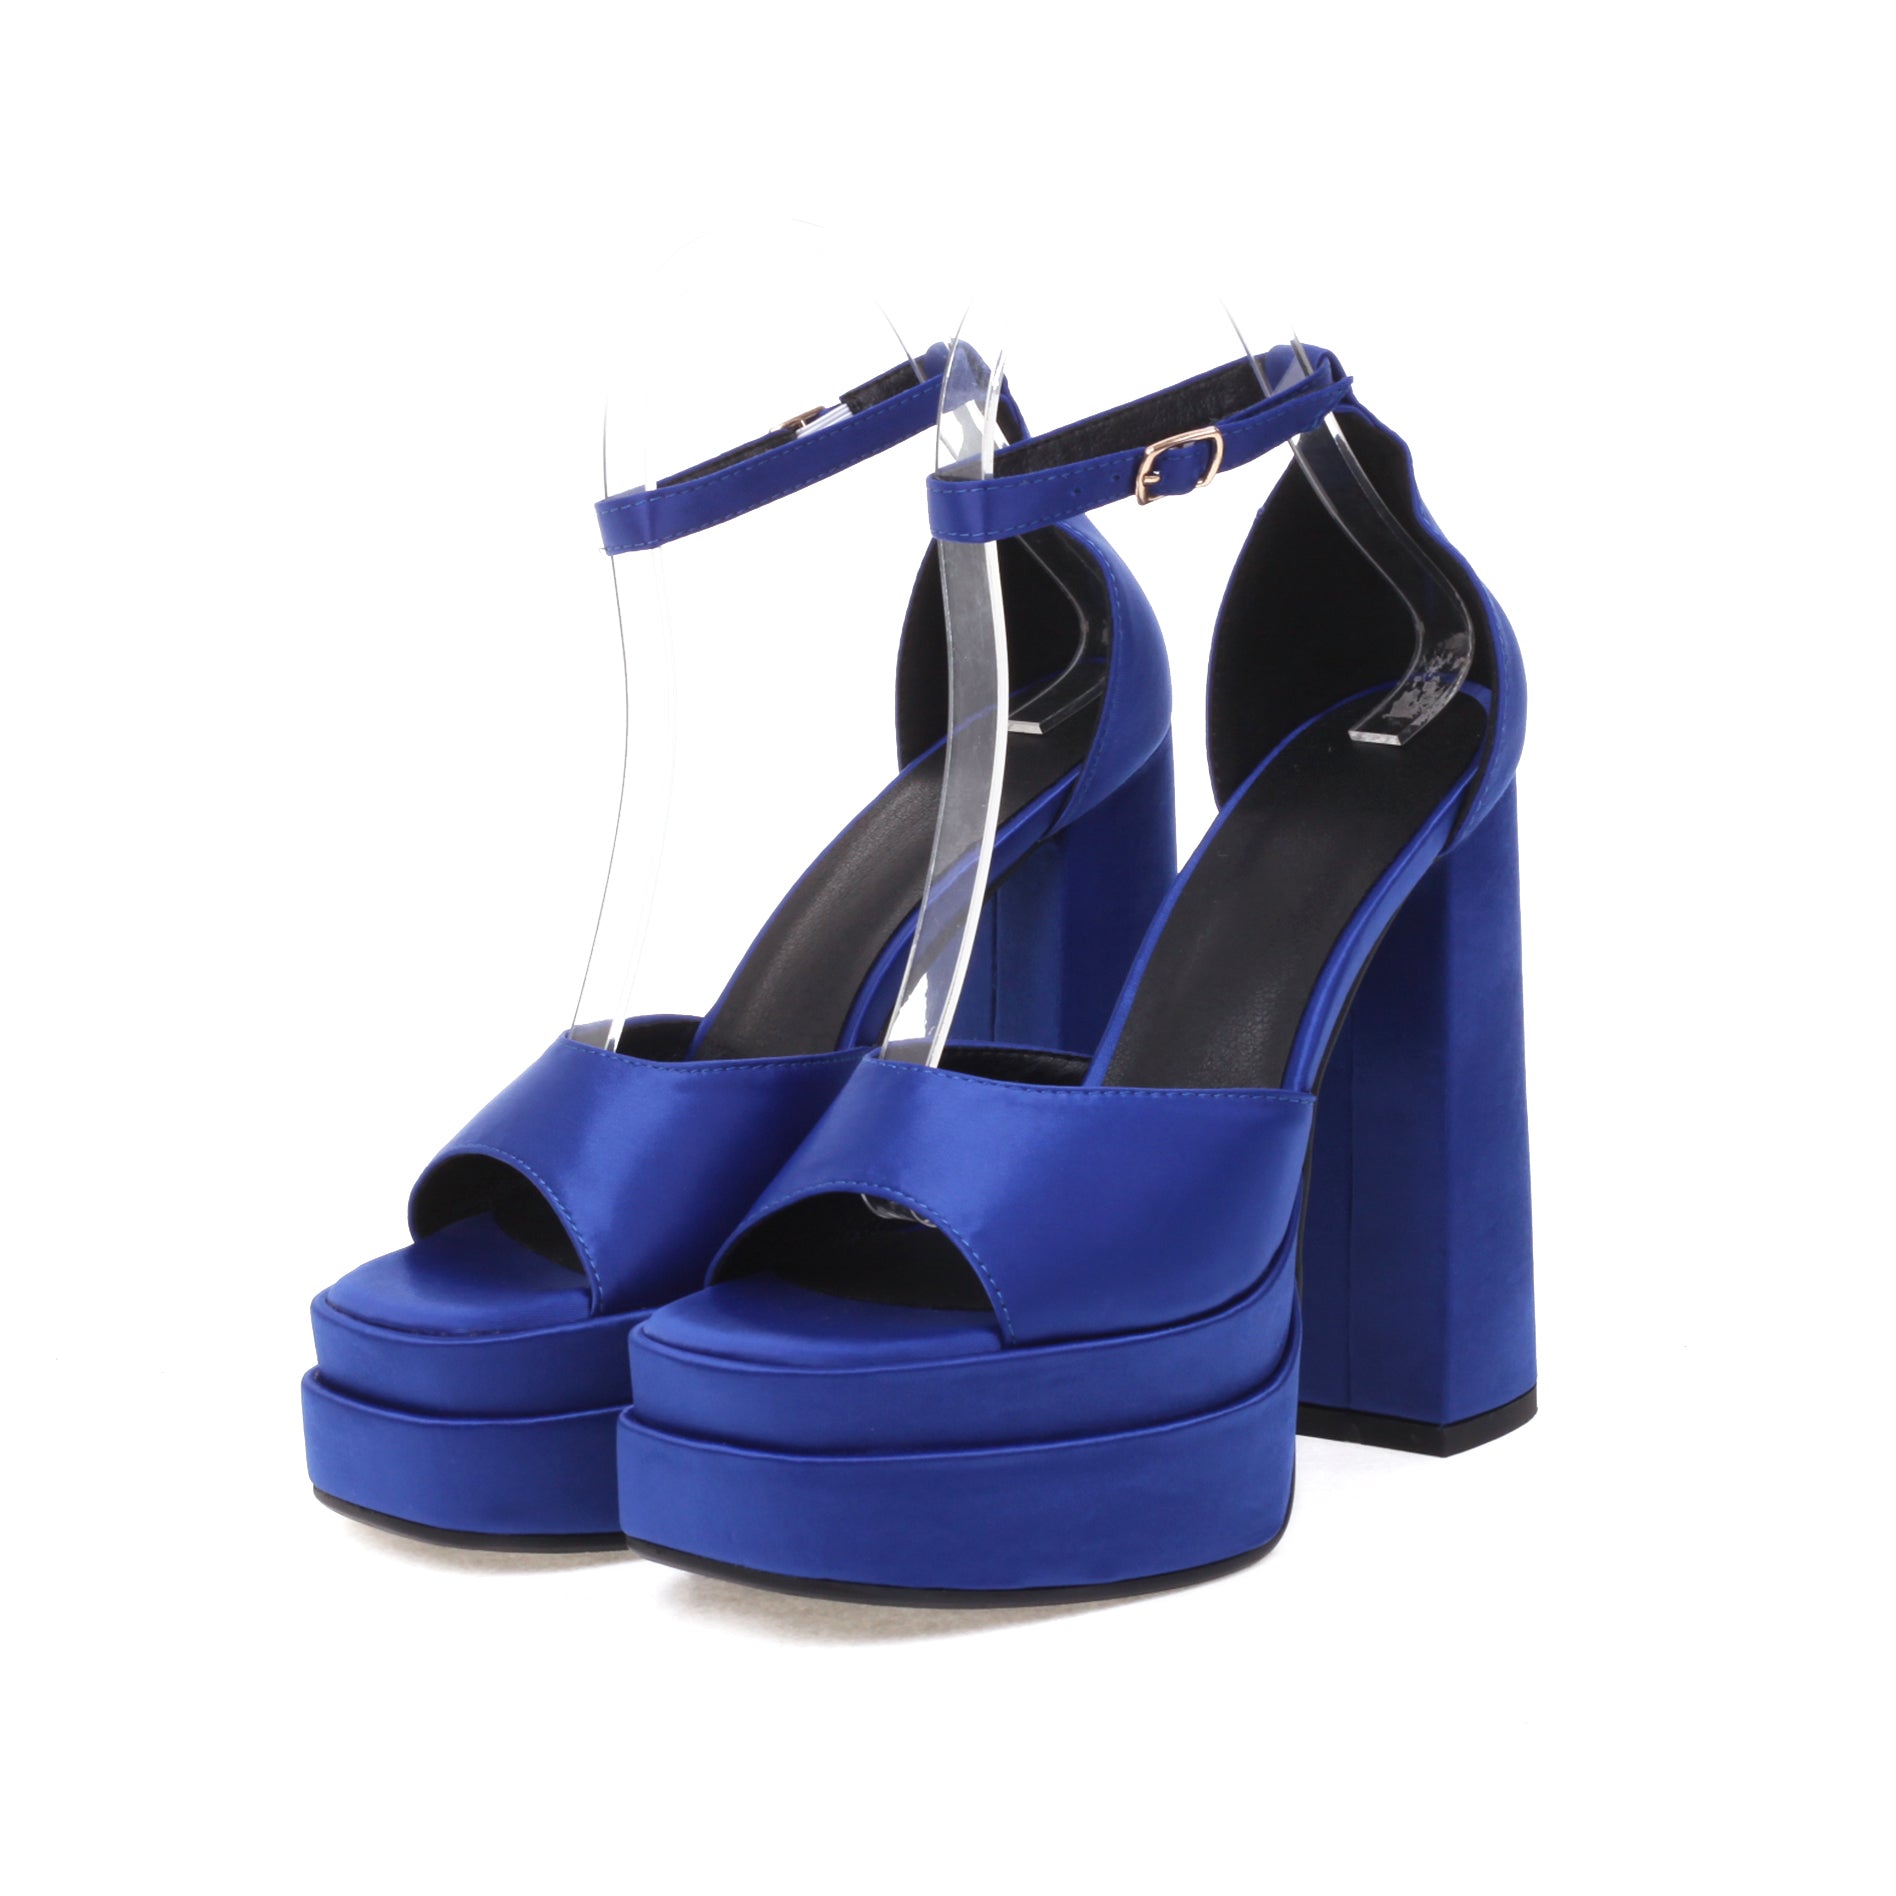 the Sexy Platform Ankle Strap Open Toe Sandals-Blue are from bigsizeheels